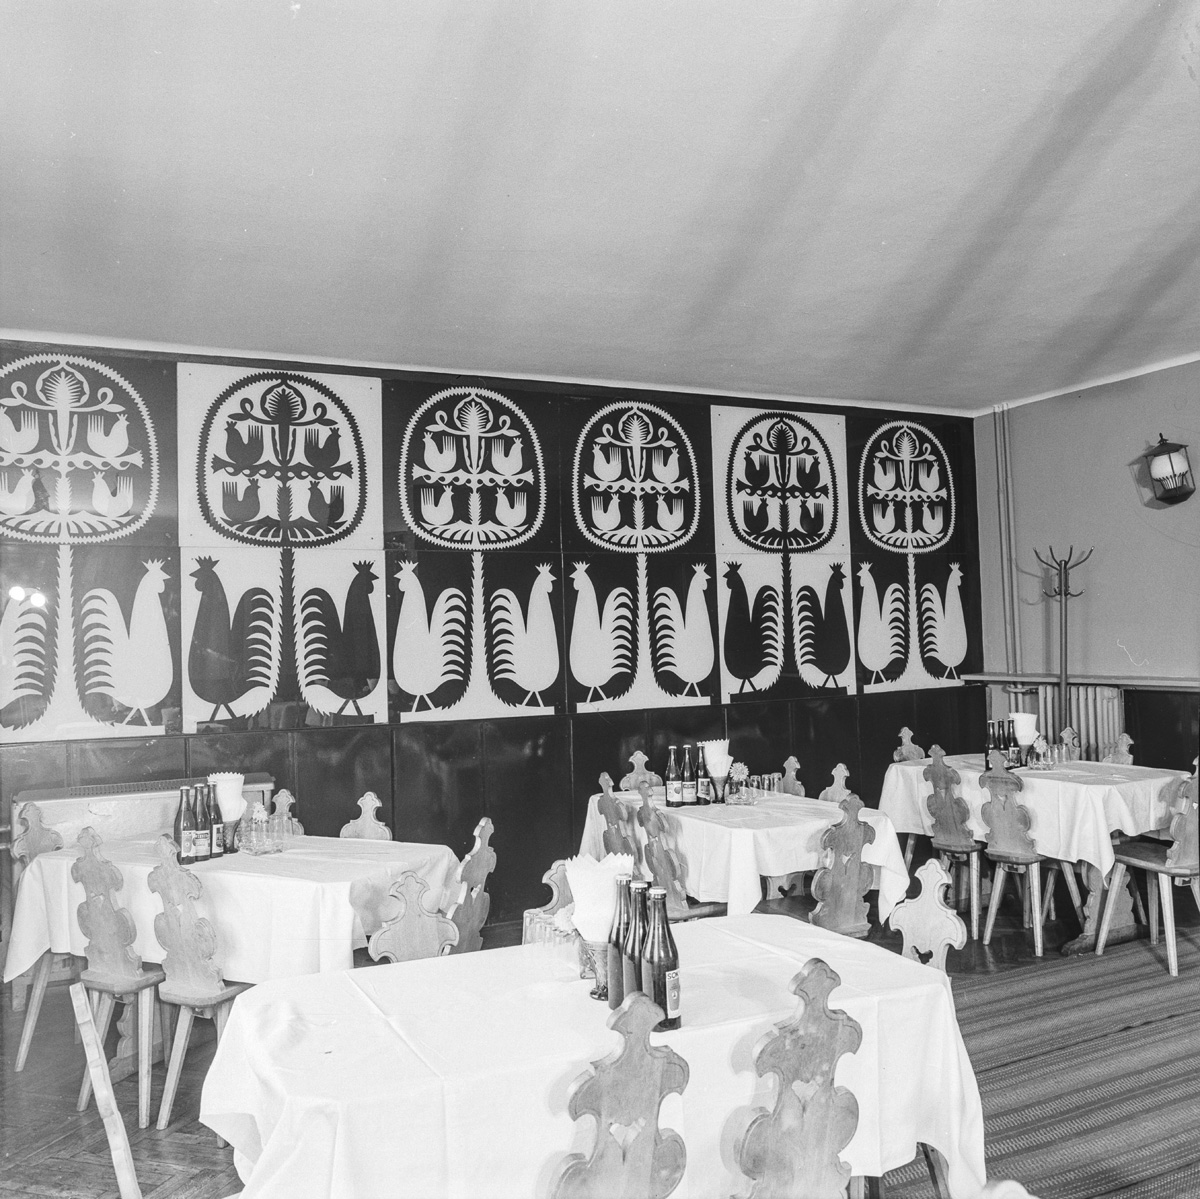 Interiors of “Under the Roosters” Inn